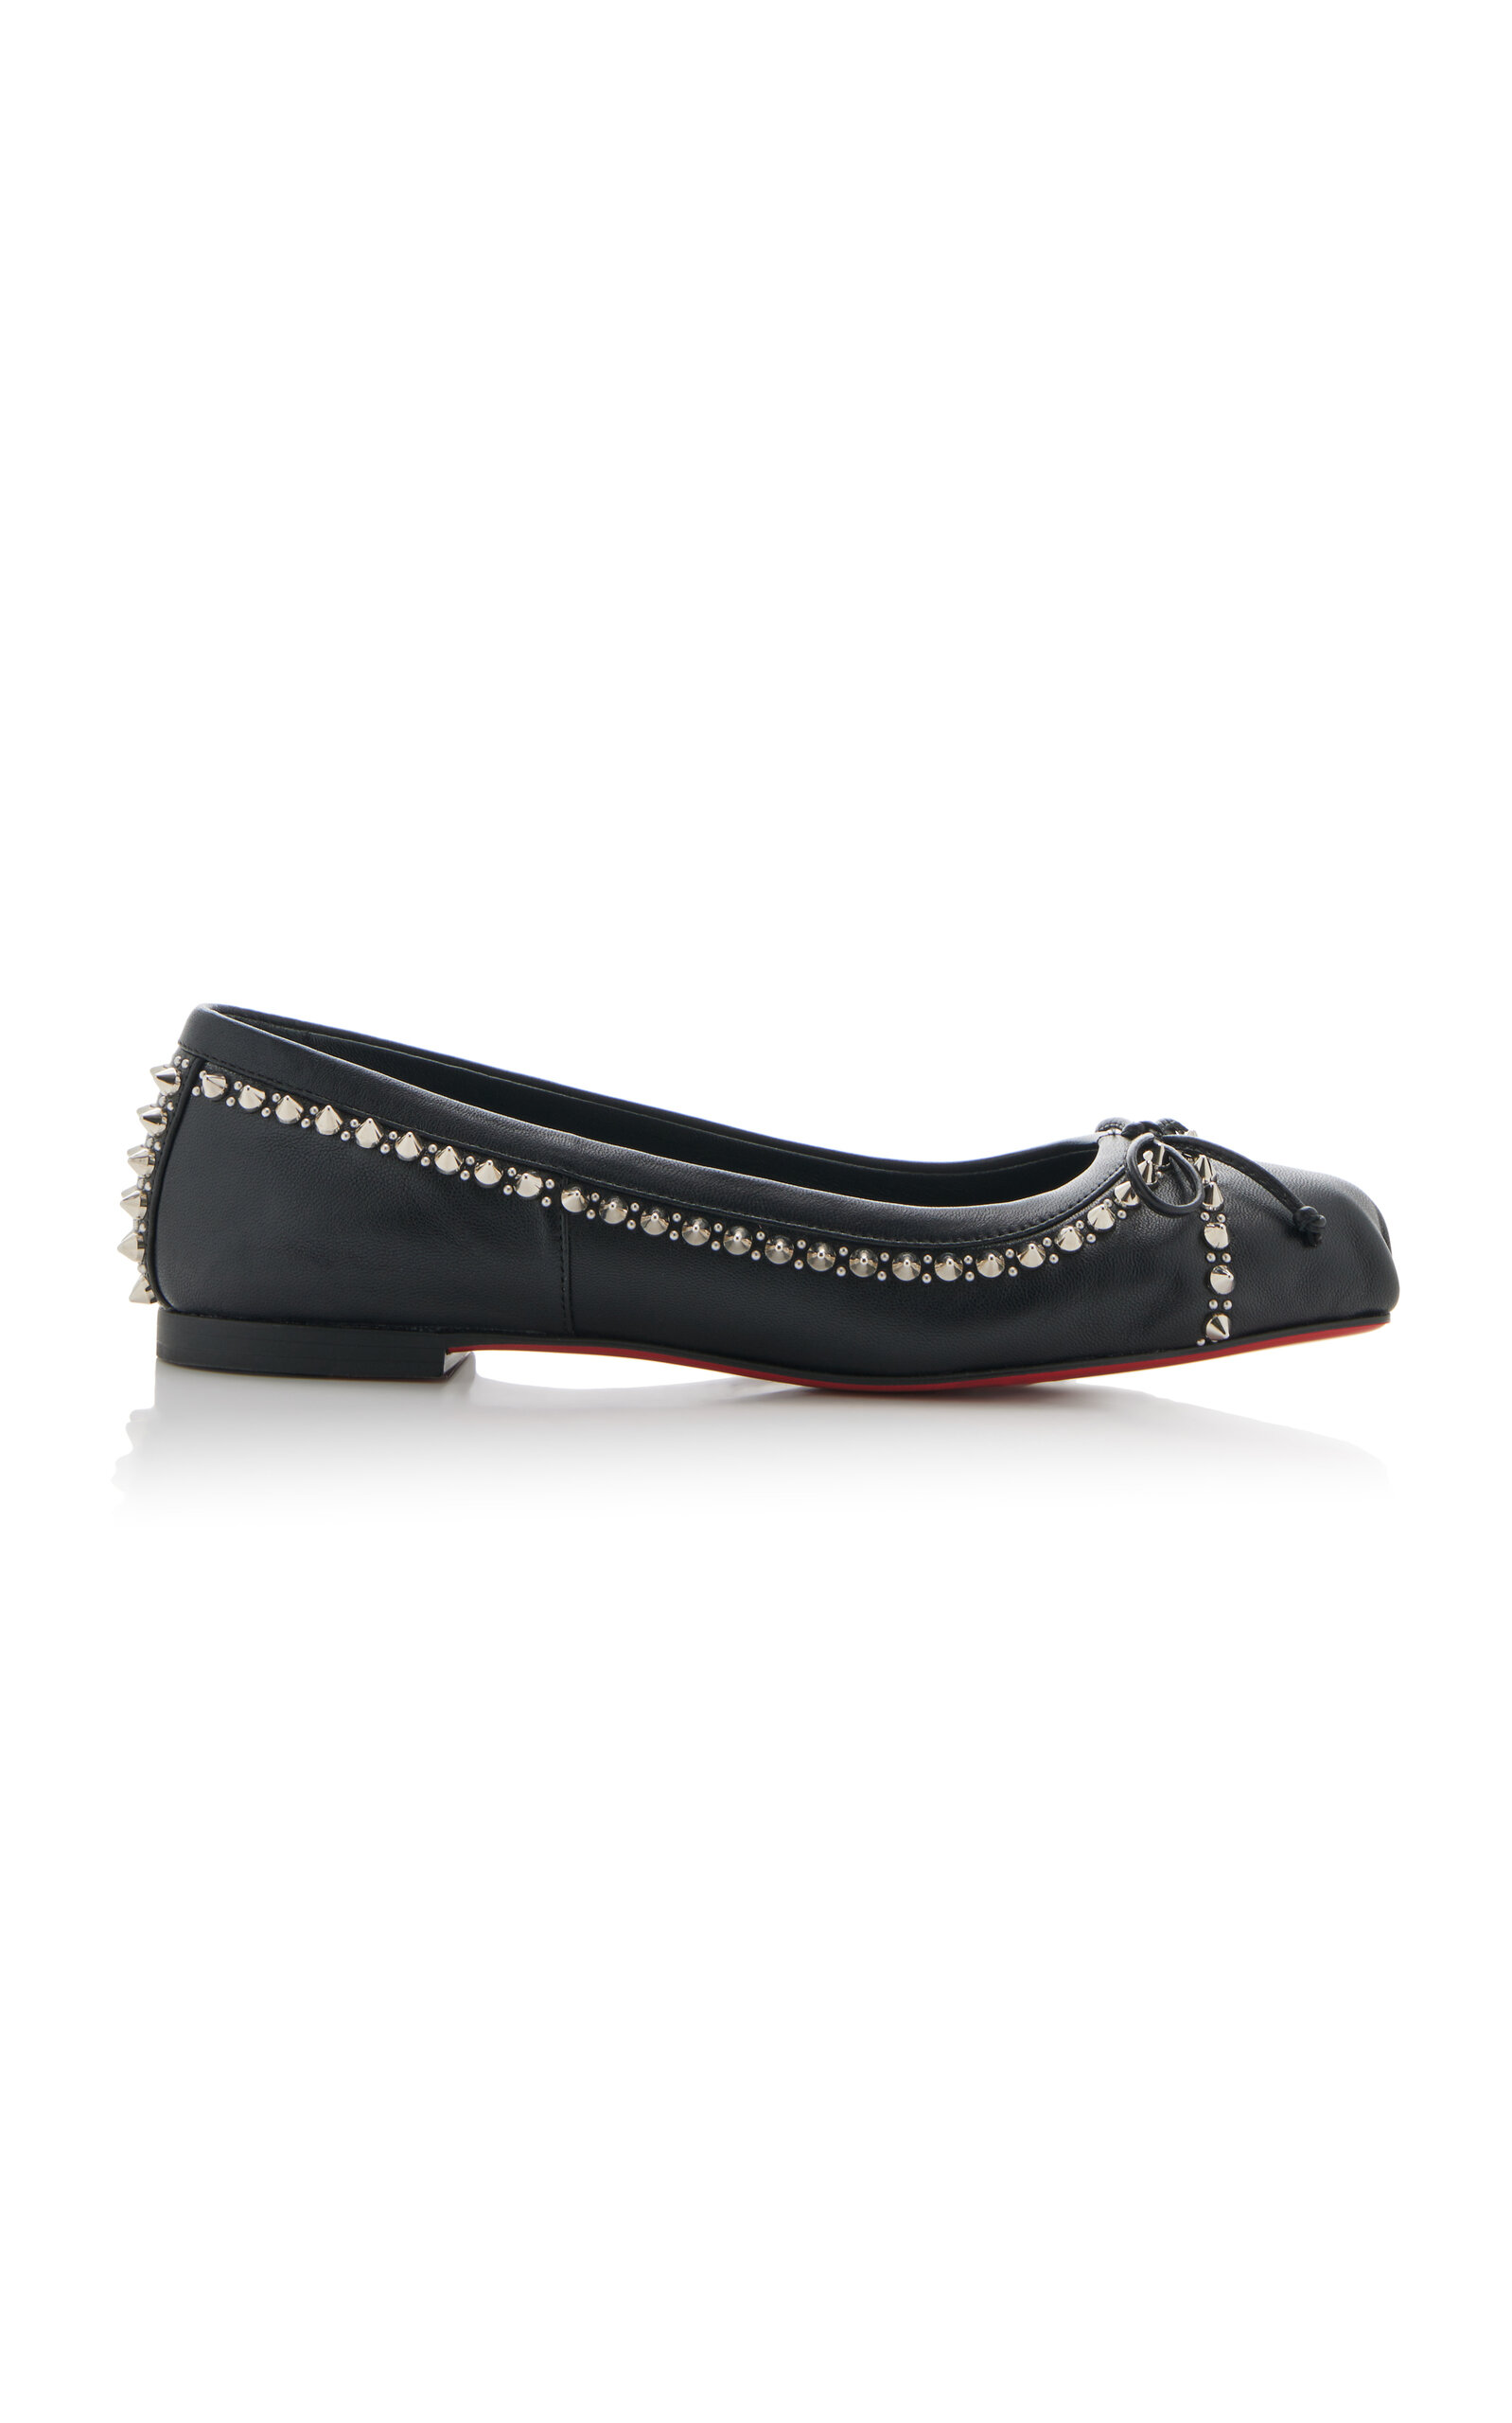 Mamadrague Spiked Leather Ballet Flats